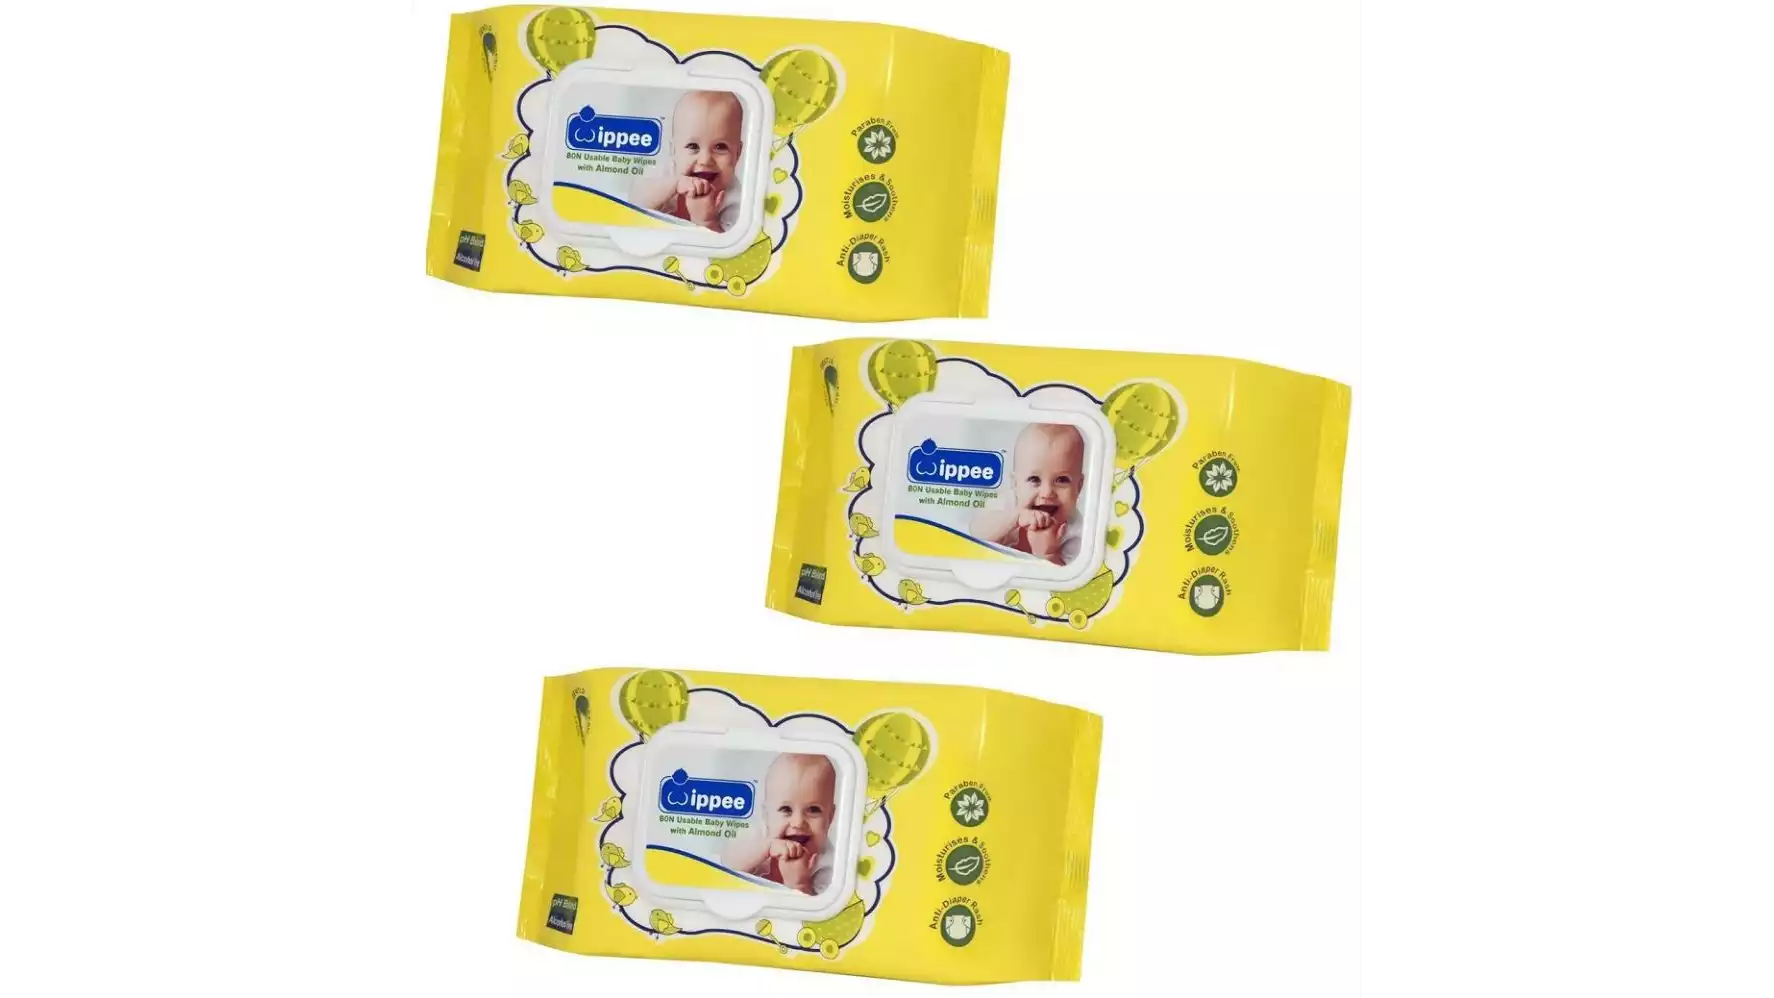 Wippee Baby Wipes (80pcs, Pack of 3)